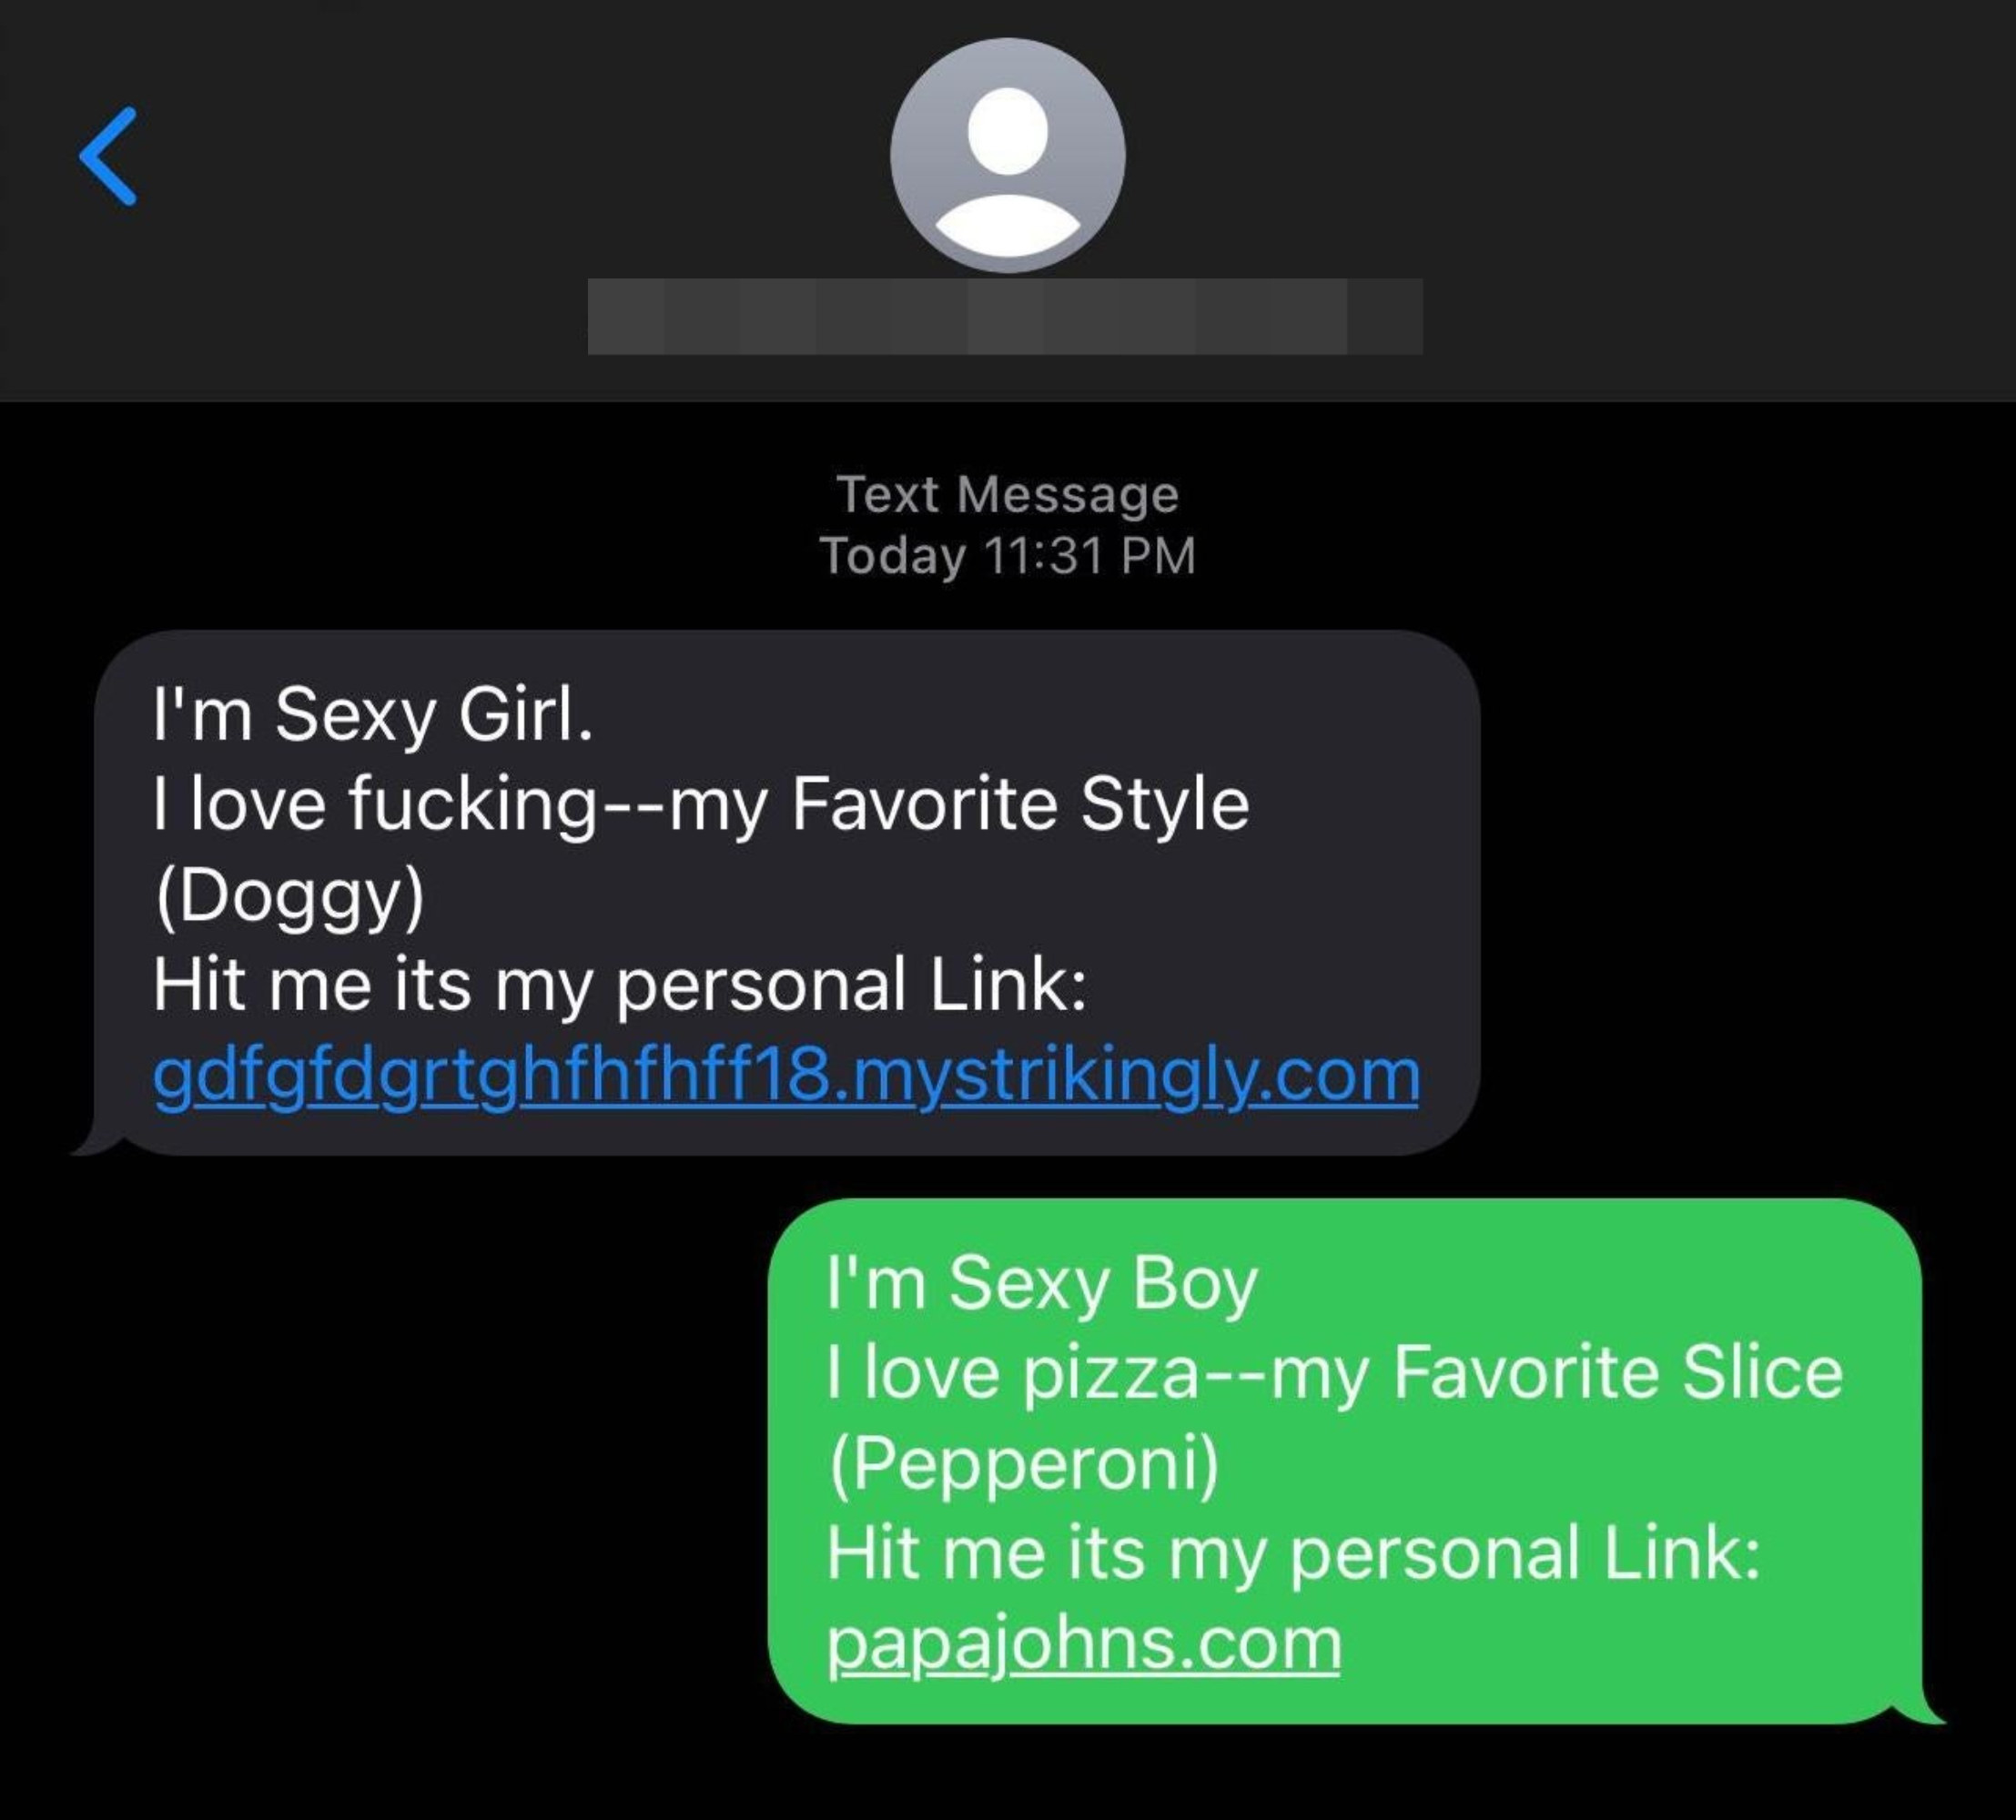 scammer asking for intercourse and person asking for pizza